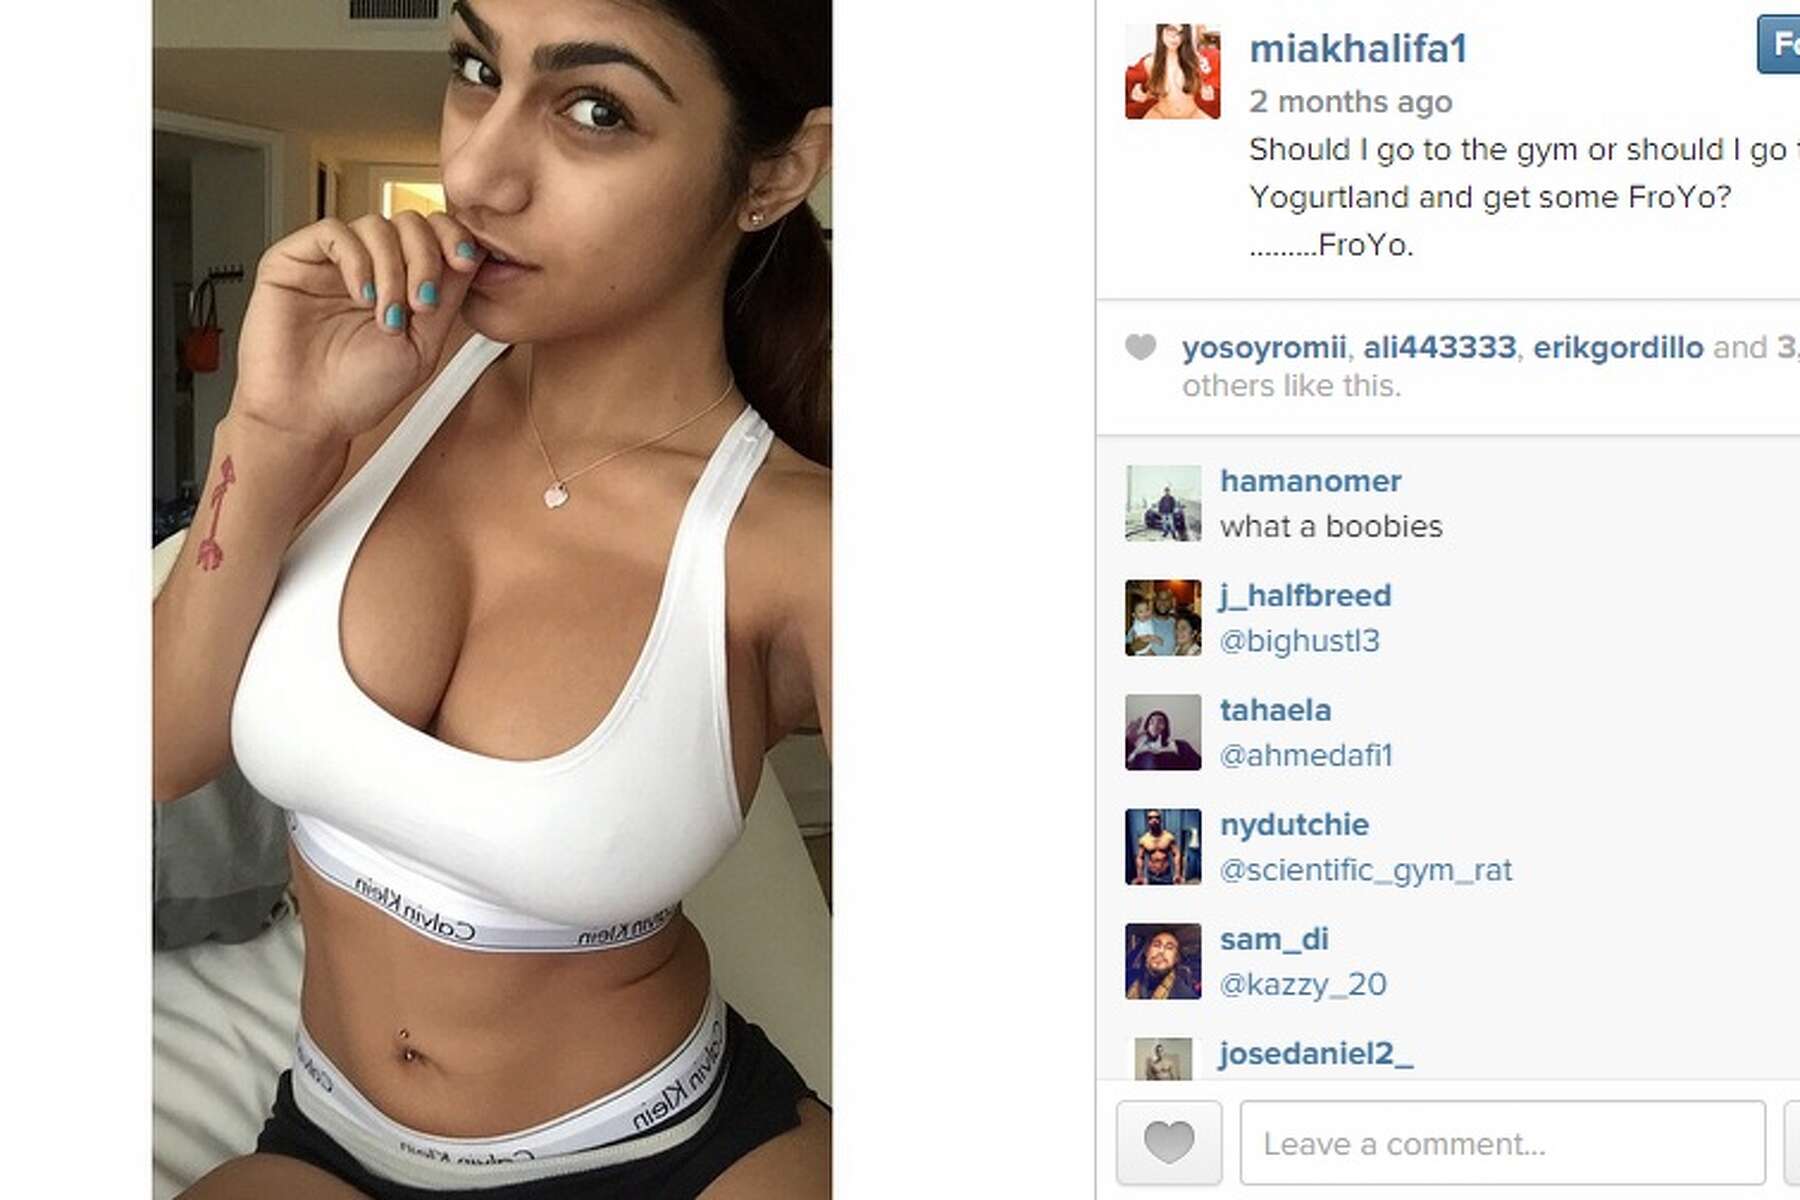 Deshaun watson mia khalifa nude pics He completed his youth career at Clems...